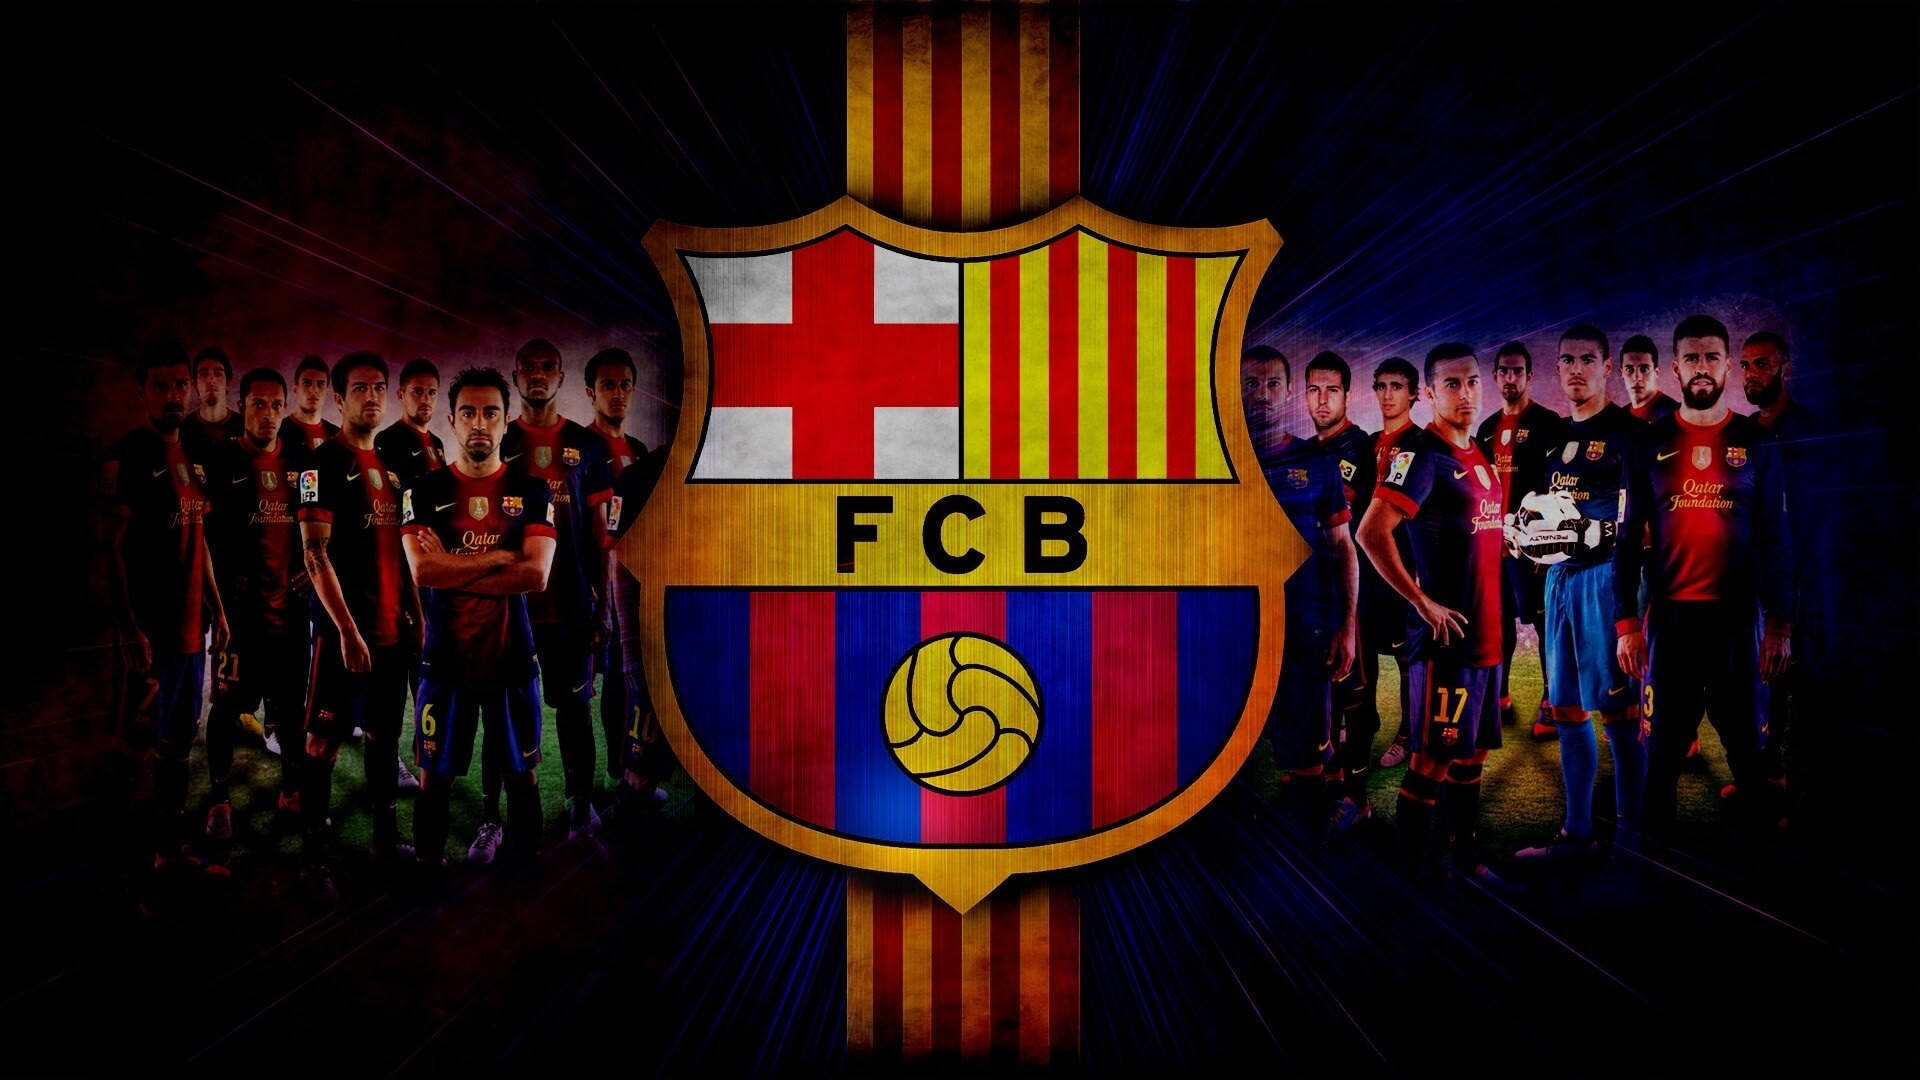 FC Barcelona History and Club Facts